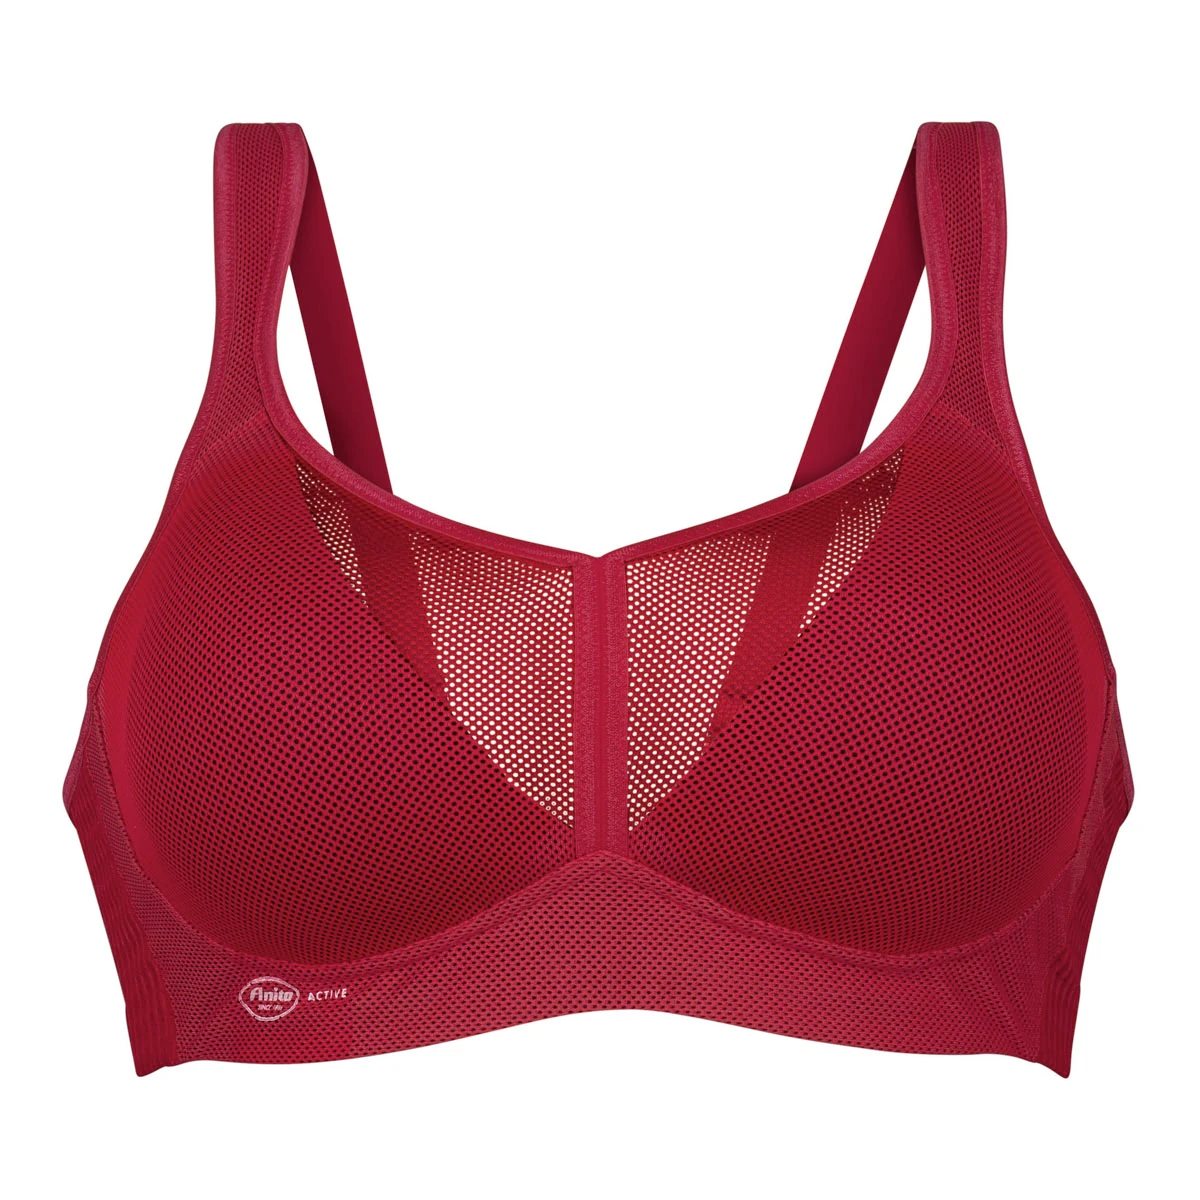 ᐅ Anita bras • 365-day right of return ⇒ Save up to 50%